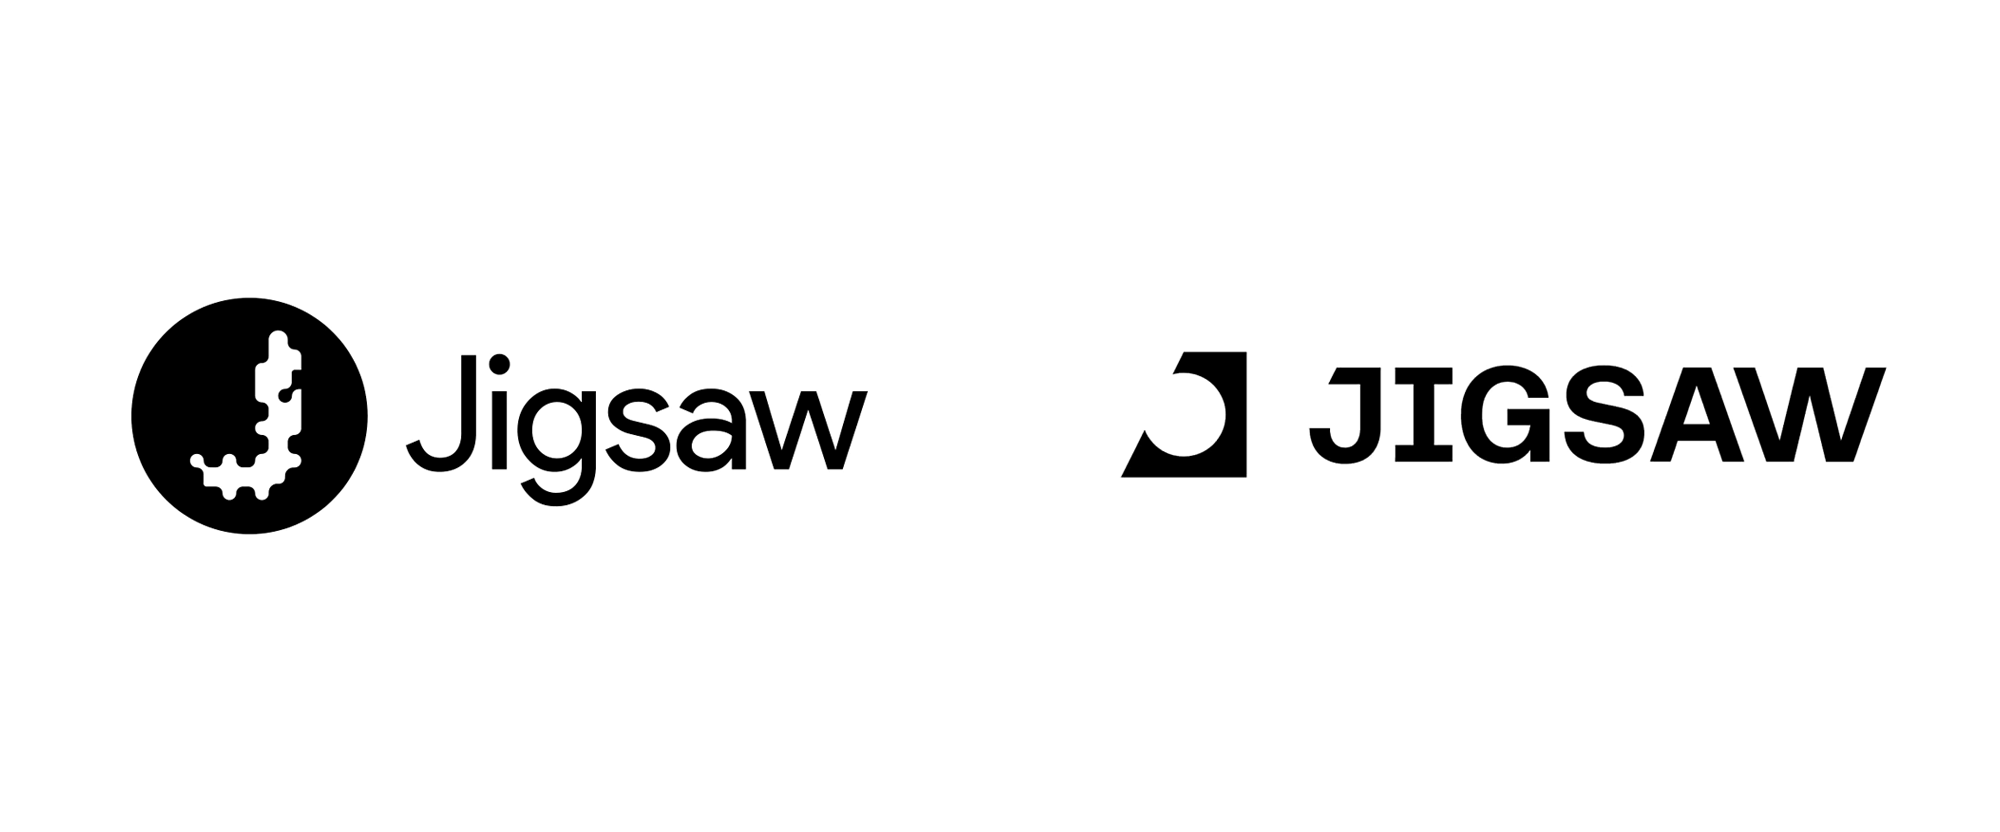 New Logo and Identity for Jigsaw by Upperquad